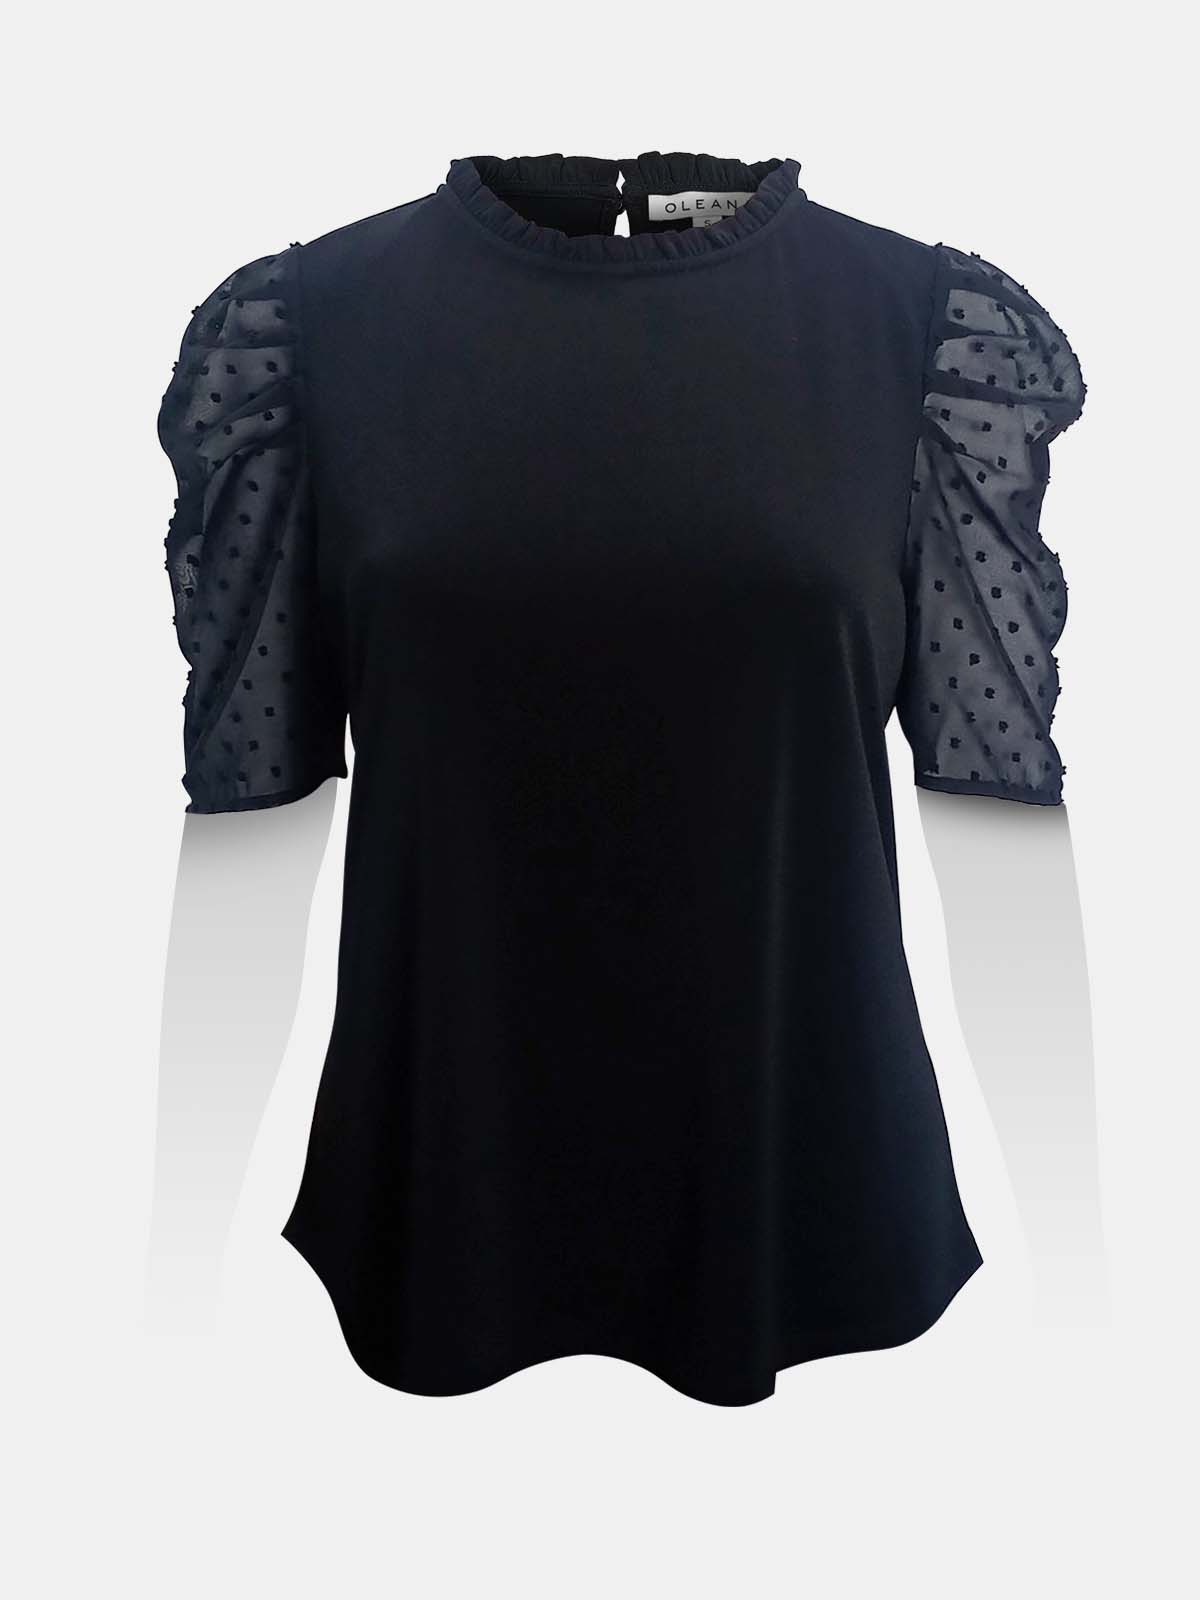 top-ruffled-neck-gathered-sleeves